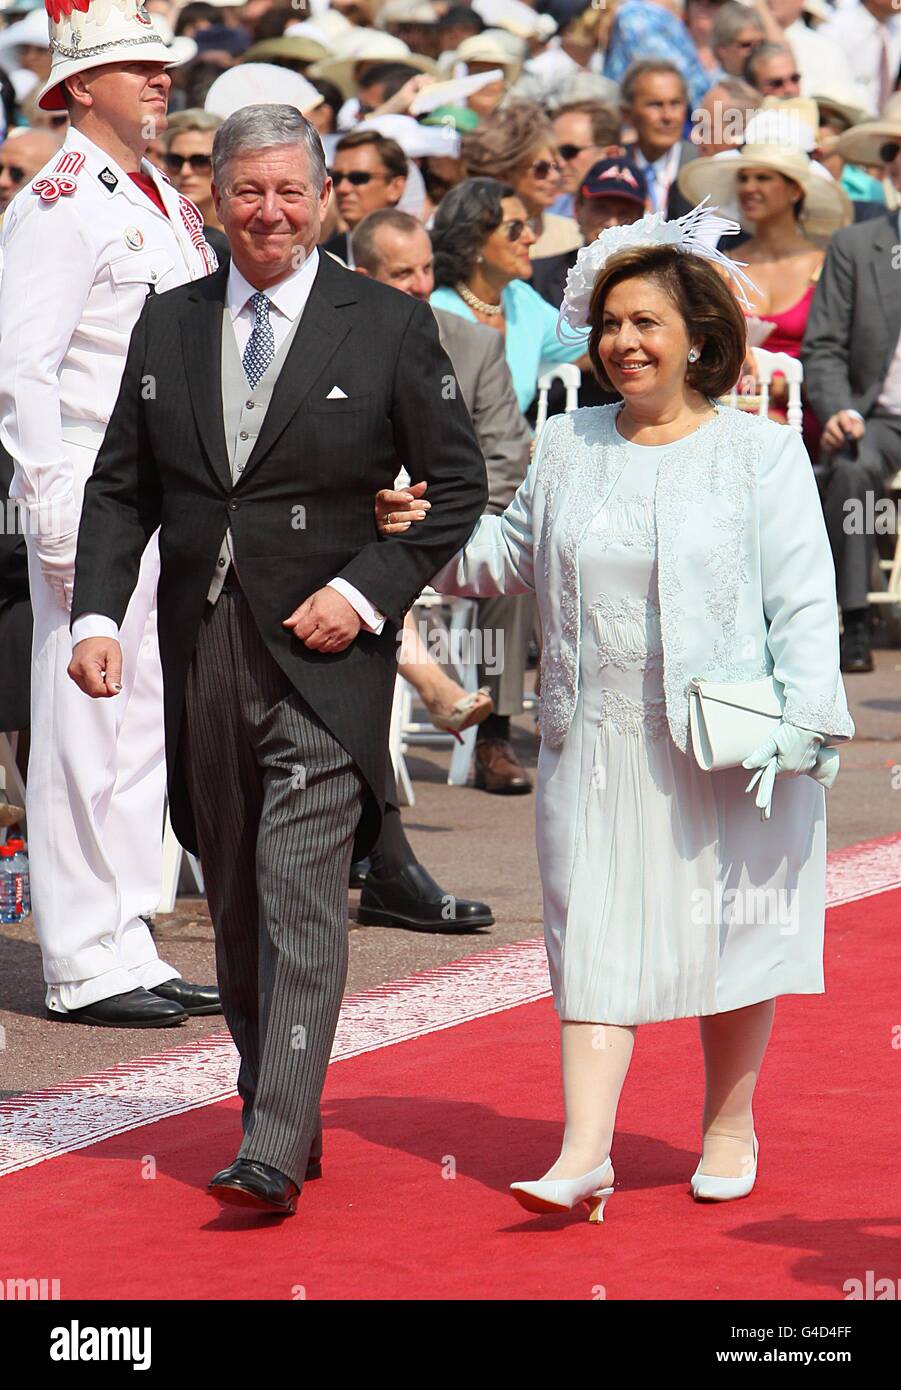 Crown Princess Katherine of Serbia and Crown Prince Alexander II of Serbia arriving for the wedding of Prince Albert II of Monaco and Charlene Wittstock at the Place du Palais. Stock Photo